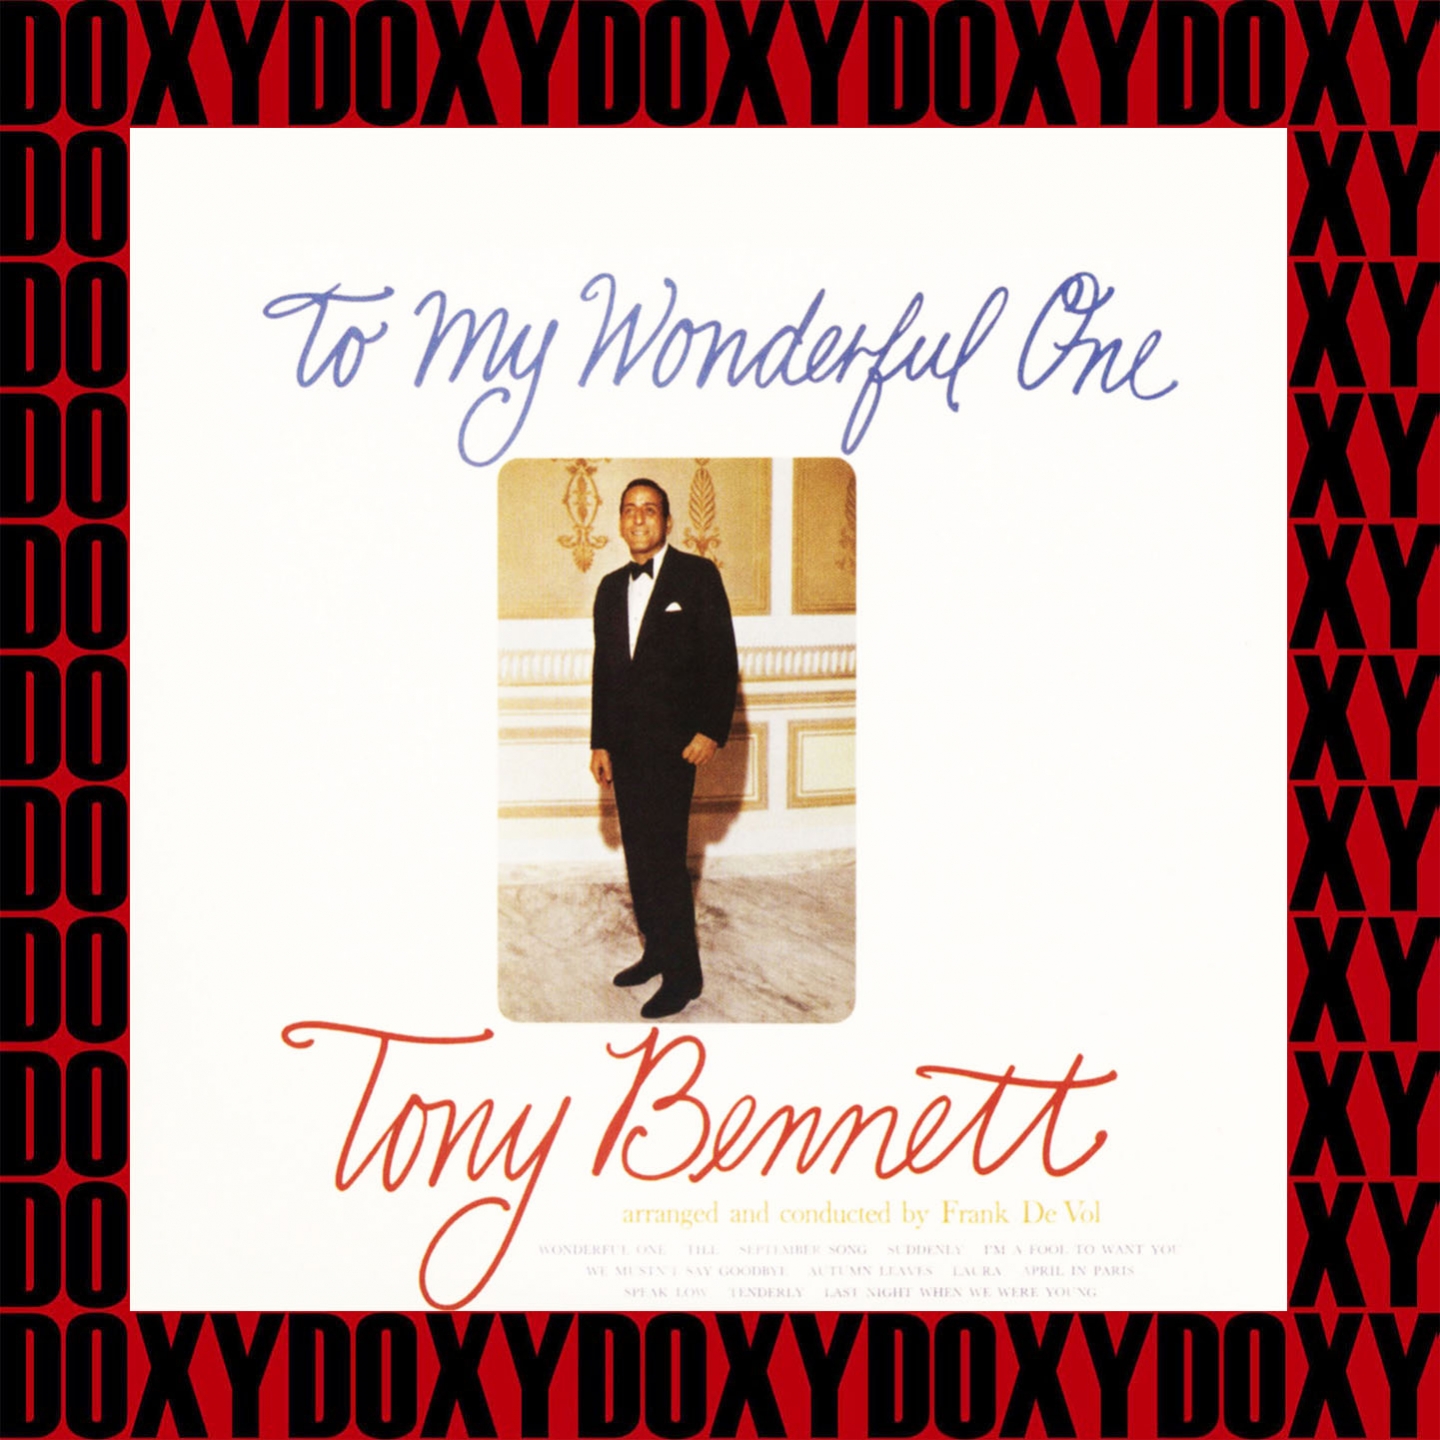 To My Wonderful One (Remastered Version) (Doxy Collection)